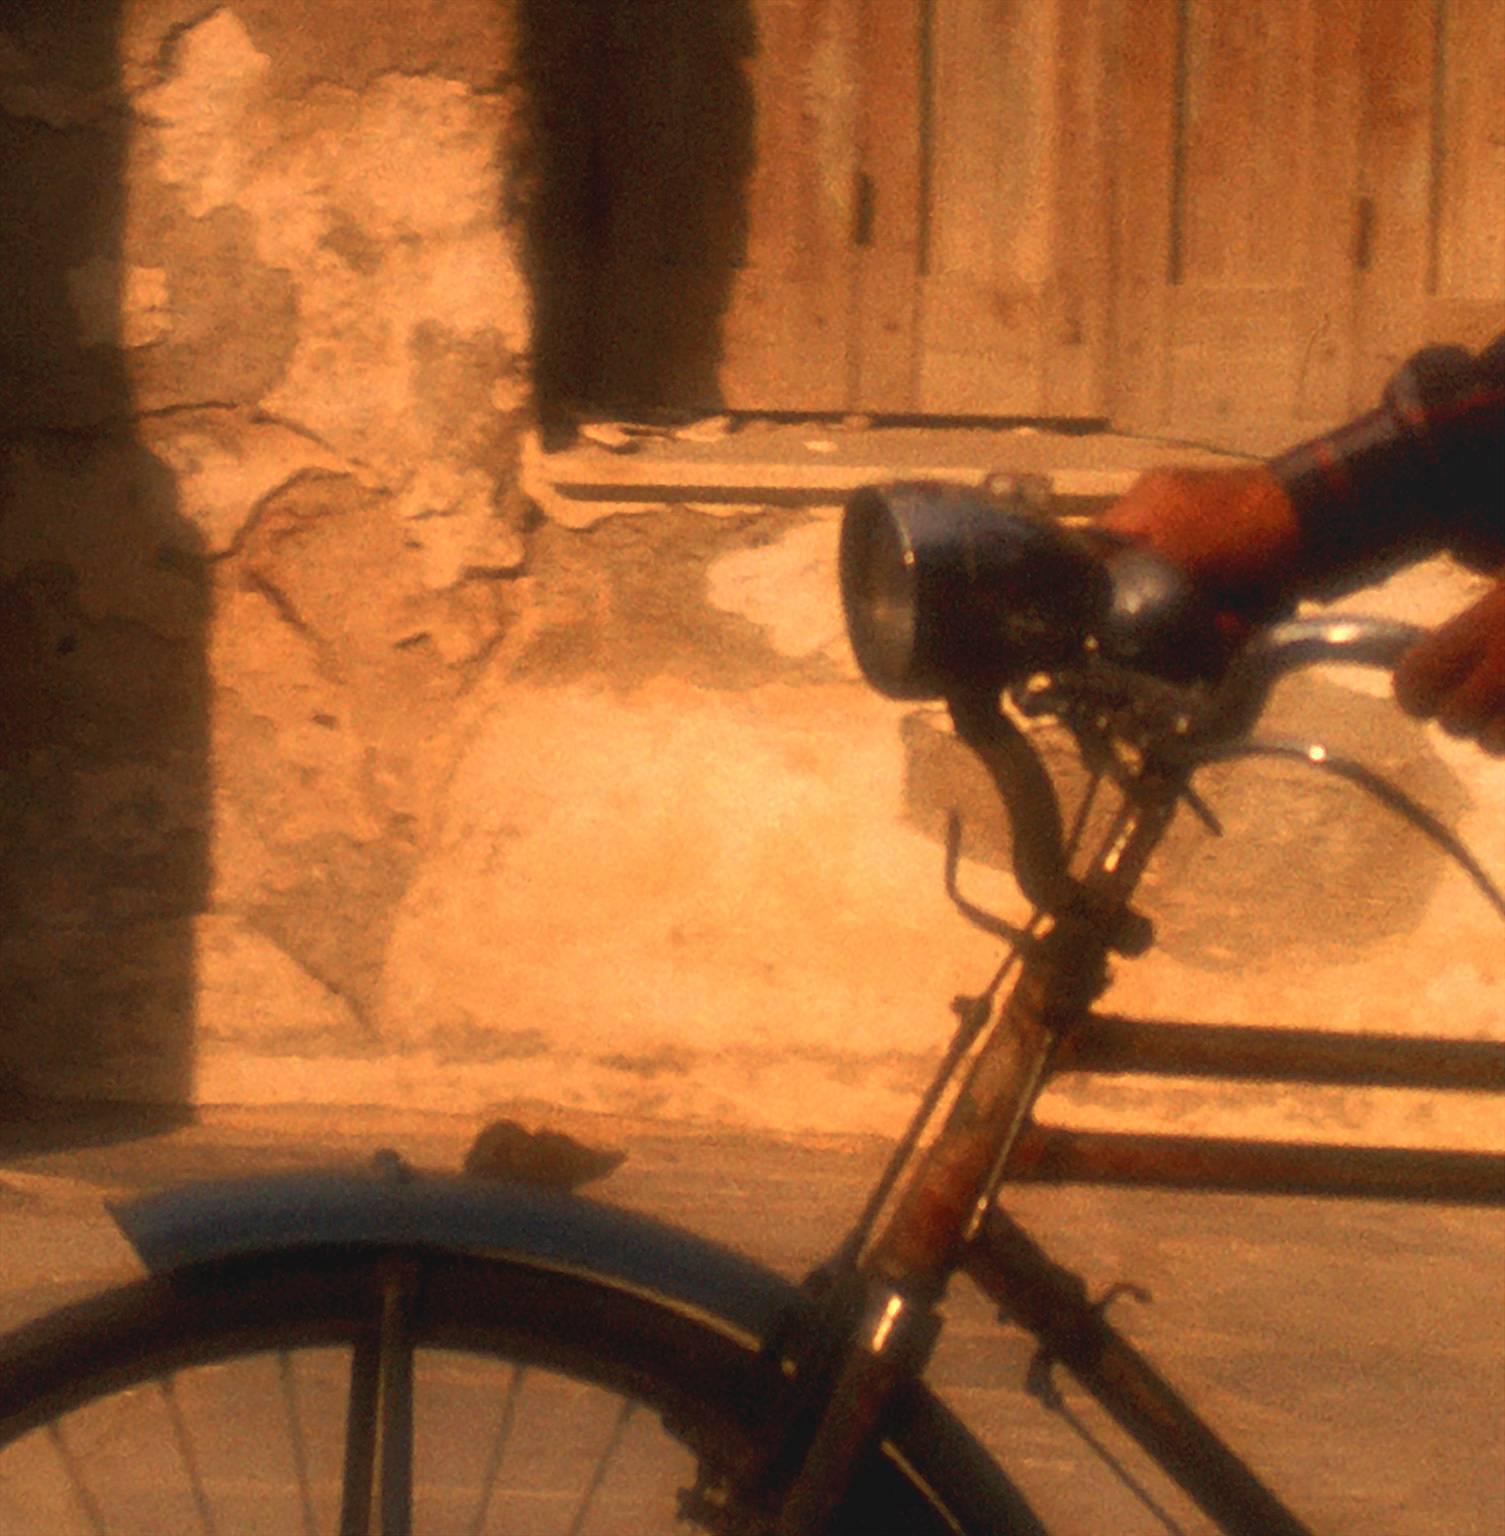 Man on Bike, Crete - Brown Color Photograph by George Simhoni